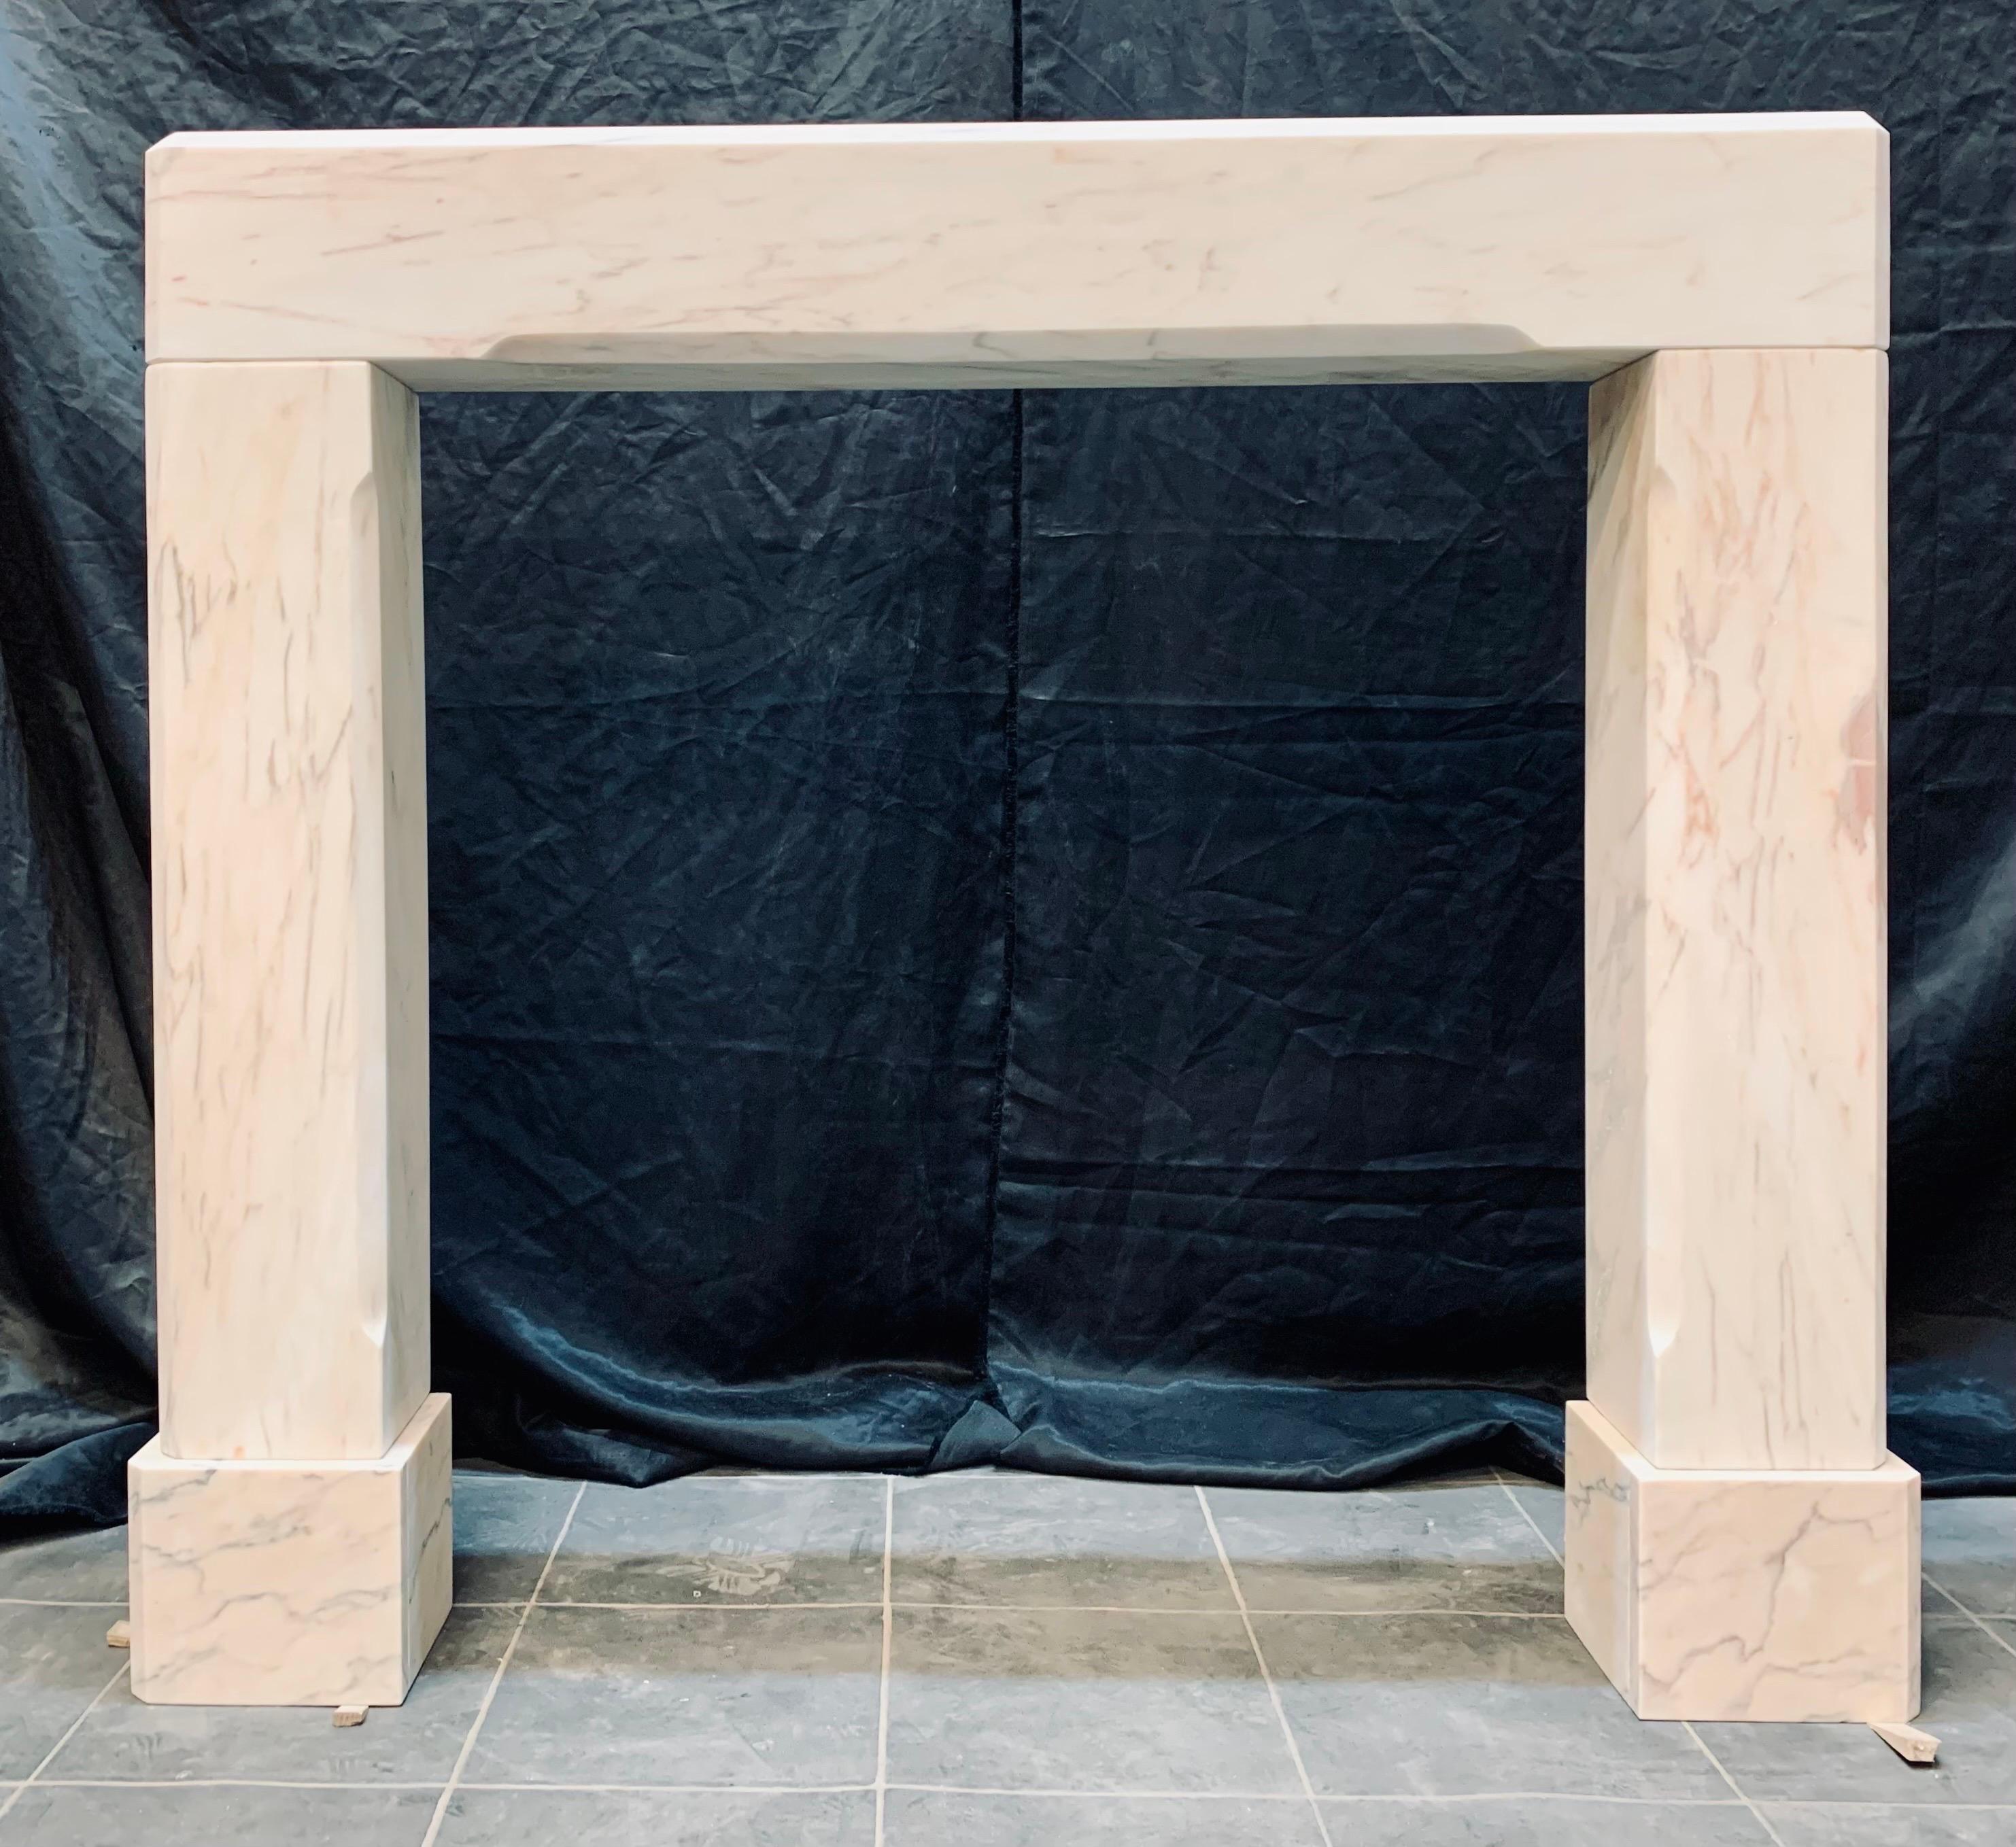 An unadorned Edwardian solid marble fireplace surround. A solid top beam with chamfer edges, the solid section jambs have further chamfers and rest on marble foot blocks. 

English 1910

Fire opening size: 850mm high x 802mm wide.

Overall